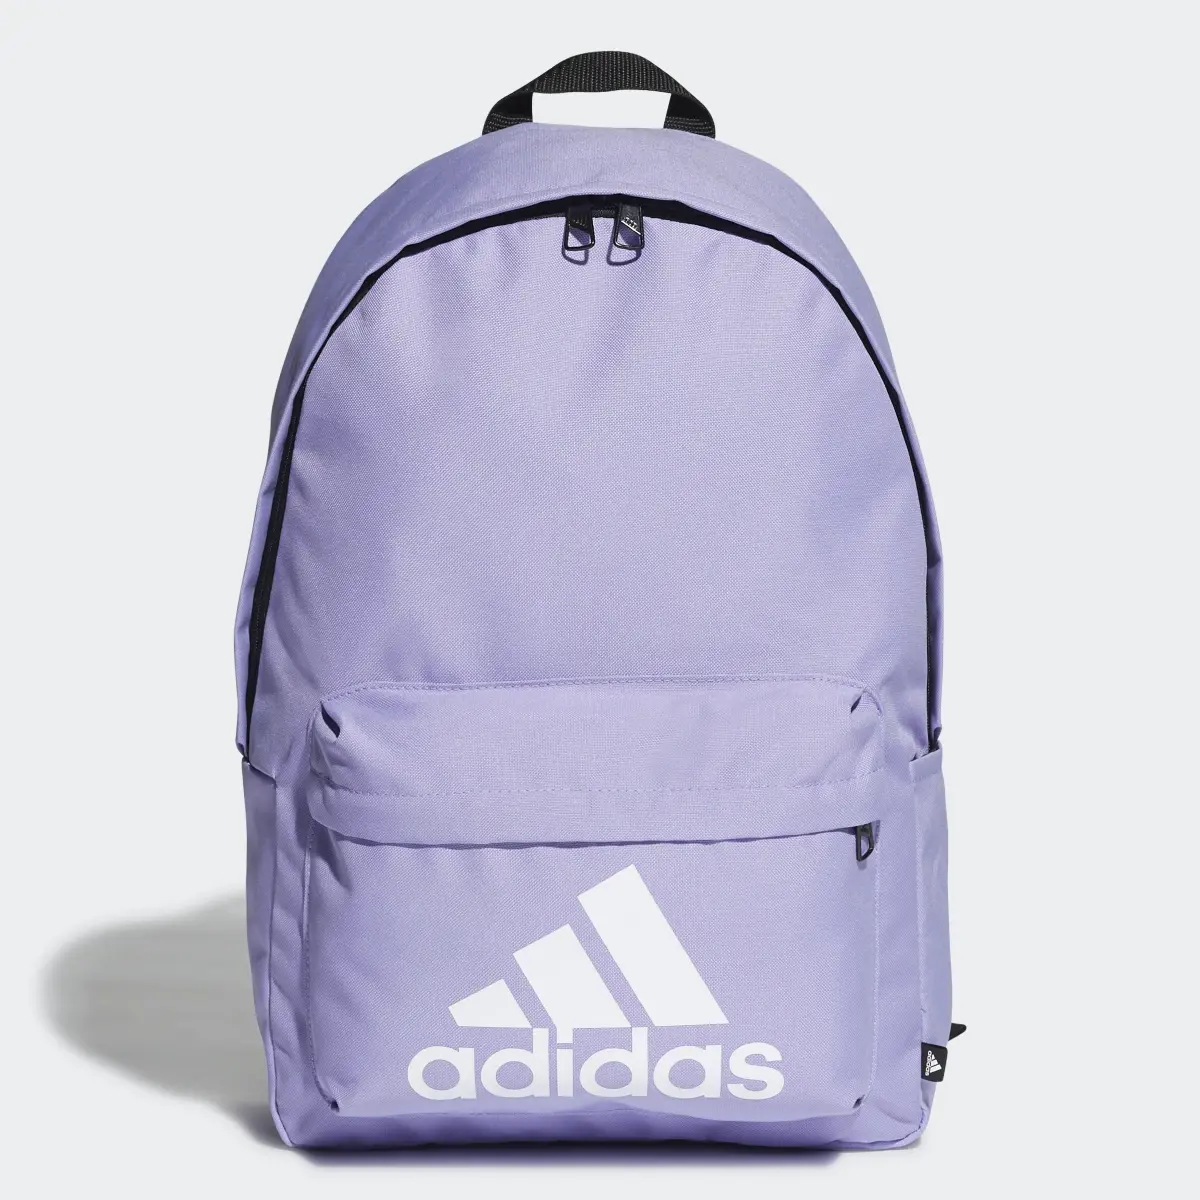 Adidas Classic Badge of Sport Backpack. 1